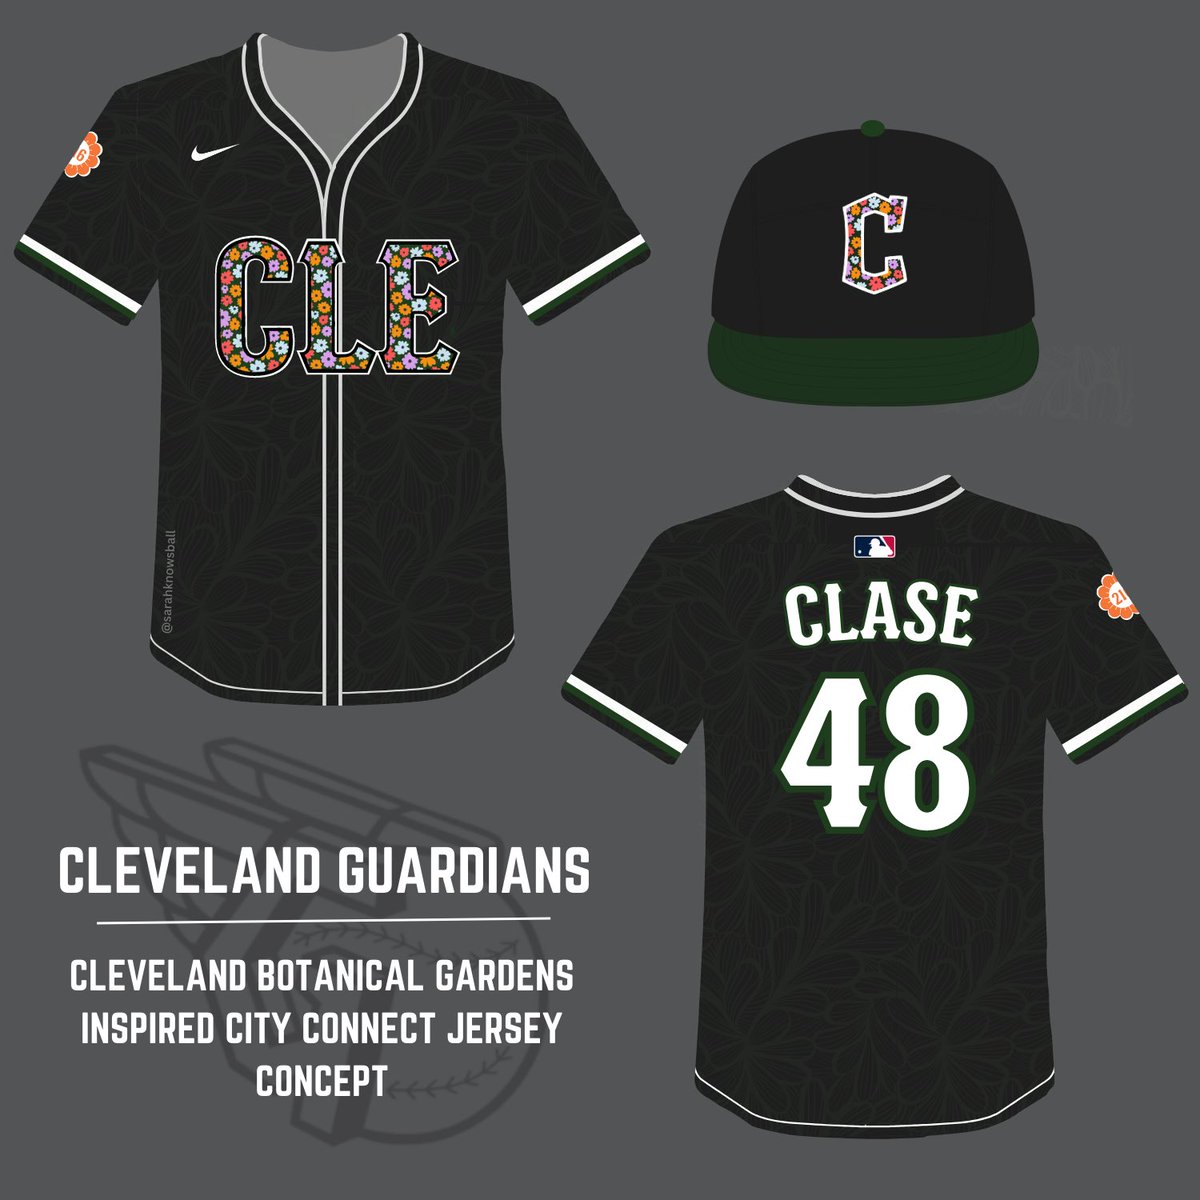 Cleveland Guardians City Connect jersey concept inspired by the Cleveland Botanical gardens:

Seasonal & colorful flowers, ‘216’ jersey patch, and subtle floral design to pair with a deep forest green as a nod to the Forest City nickname.

#ForTheLand https://t.co/LZu1qLW1Mc